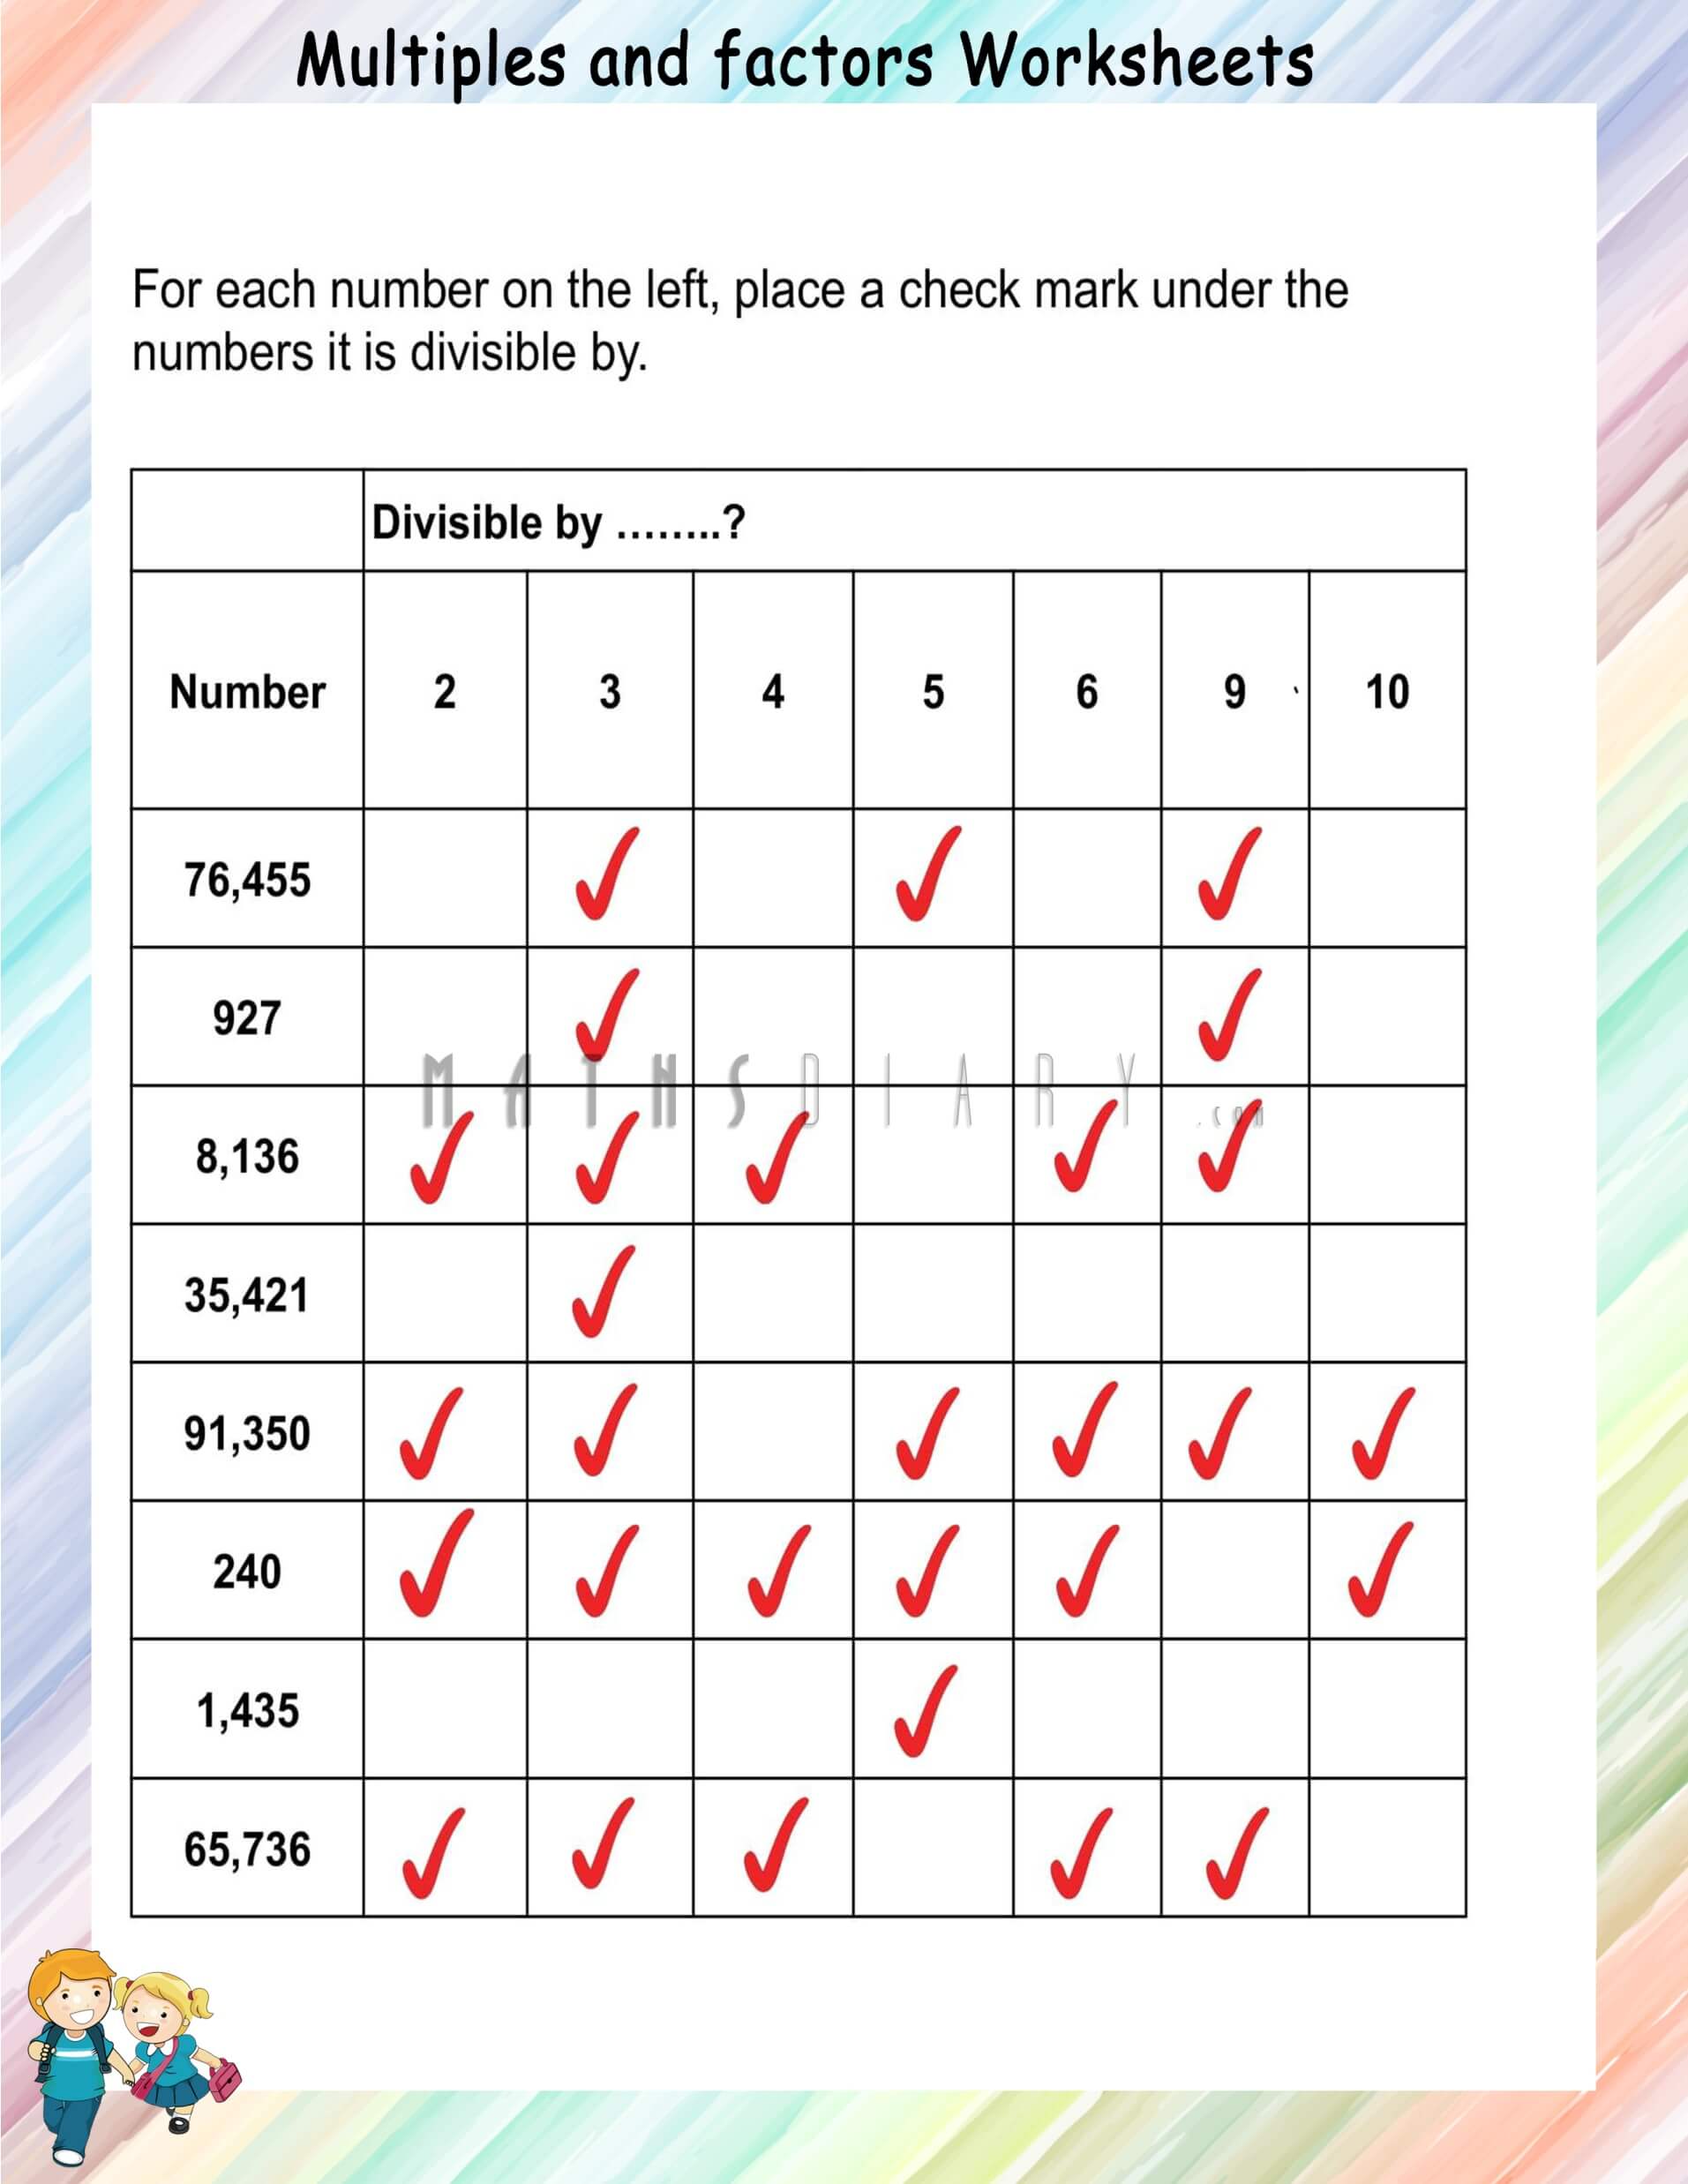 more-divisibility-rules-worksheets-k5-learning-divisibility-rules-for